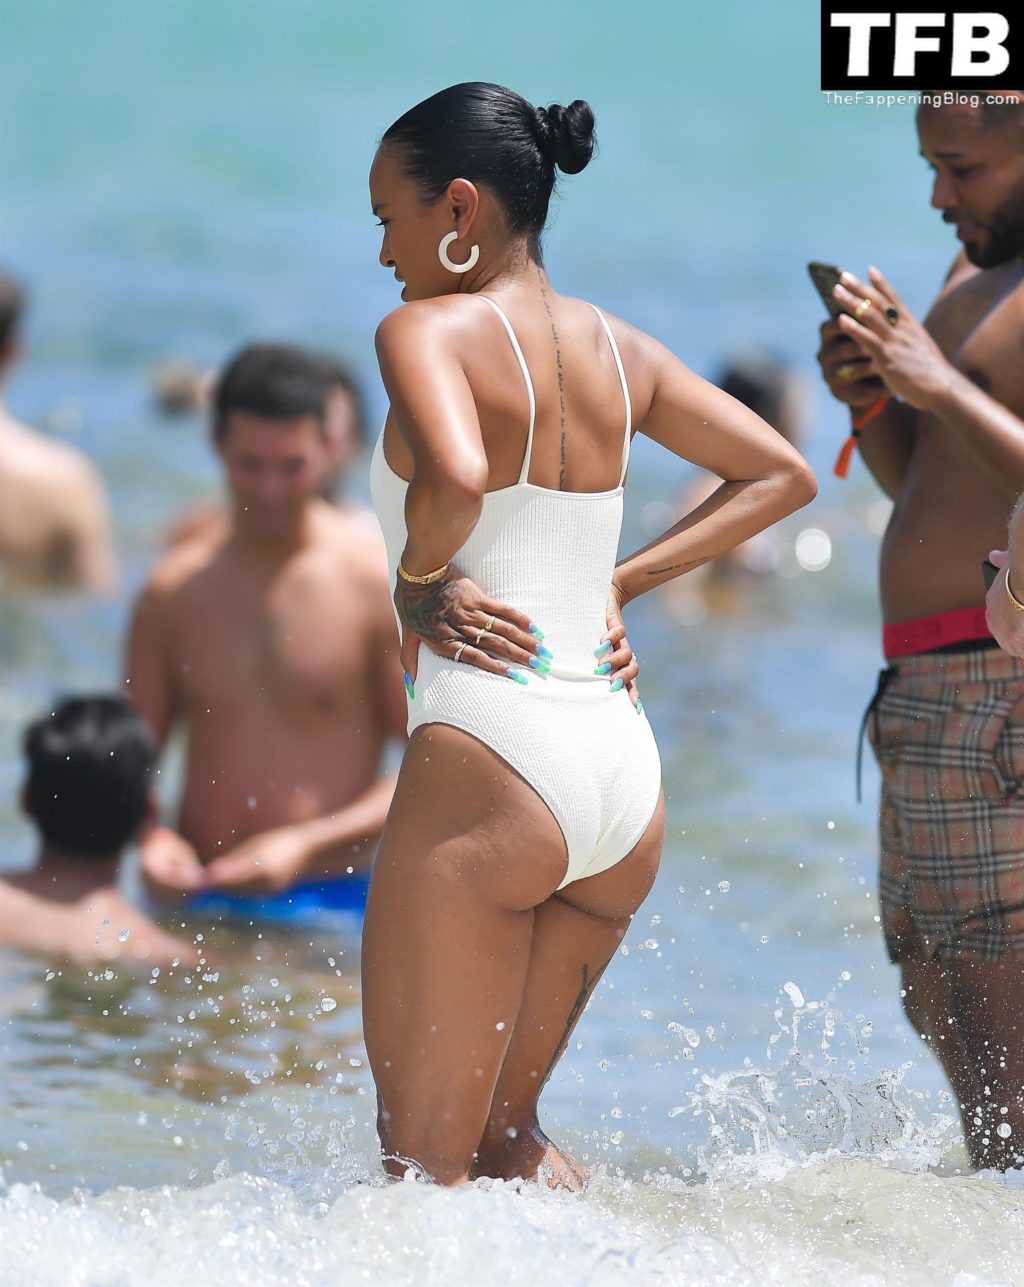 Karrueche Tran Sexy The Fappening Blog 14 1024x1287 - Karrueche Tran Looks Incredible in a White Swimsuit on the Beach in Miami (45 Photos)